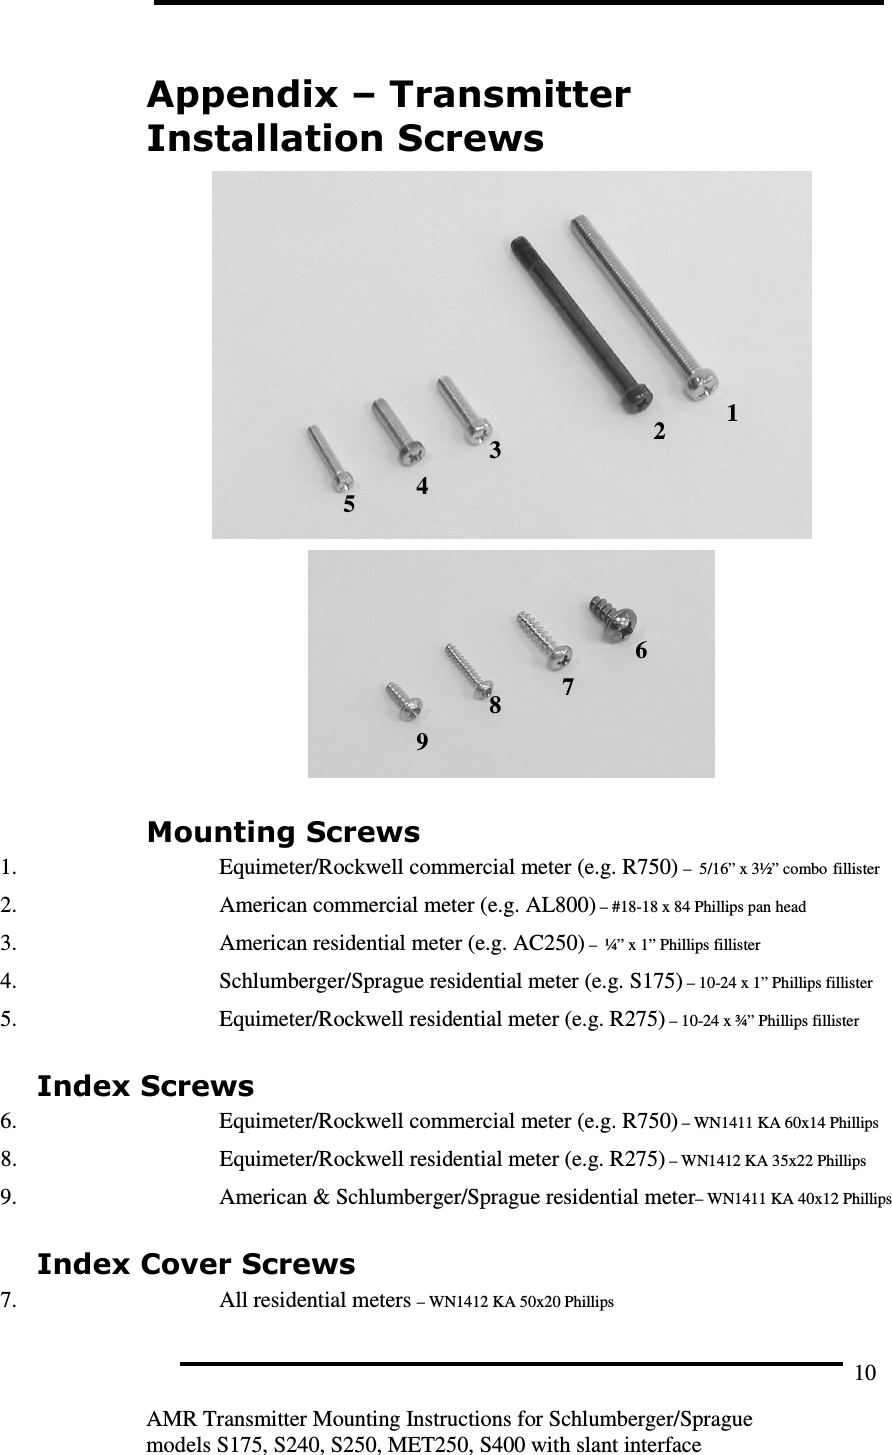         AMR Transmitter Mounting Instructions for Schlumberger/Sprague  models S175, S240, S250, MET250, S400 with slant interface 10 Appendix – Transmitter Installation Screws   Mounting Screws 1. Equimeter/Rockwell commercial meter (e.g. R750) –  5/16” x 3½” combo fillister  2. American commercial meter (e.g. AL800) – #18-18 x 84 Phillips pan head 3. American residential meter (e.g. AC250) –  ¼” x 1” Phillips fillister  4. Schlumberger/Sprague residential meter (e.g. S175) – 10-24 x 1” Phillips fillister 5. Equimeter/Rockwell residential meter (e.g. R275) – 10-24 x ¾” Phillips fillister Index Screws 6. Equimeter/Rockwell commercial meter (e.g. R750) – WN1411 KA 60x14 Phillips 8. Equimeter/Rockwell residential meter (e.g. R275) – WN1412 KA 35x22 Phillips 9. American &amp; Schlumberger/Sprague residential meter– WN1411 KA 40x12 Phillips Index Cover Screws 7. All residential meters – WN1412 KA 50x20 Phillips 1 2 3 4 5 6 7 8 9 